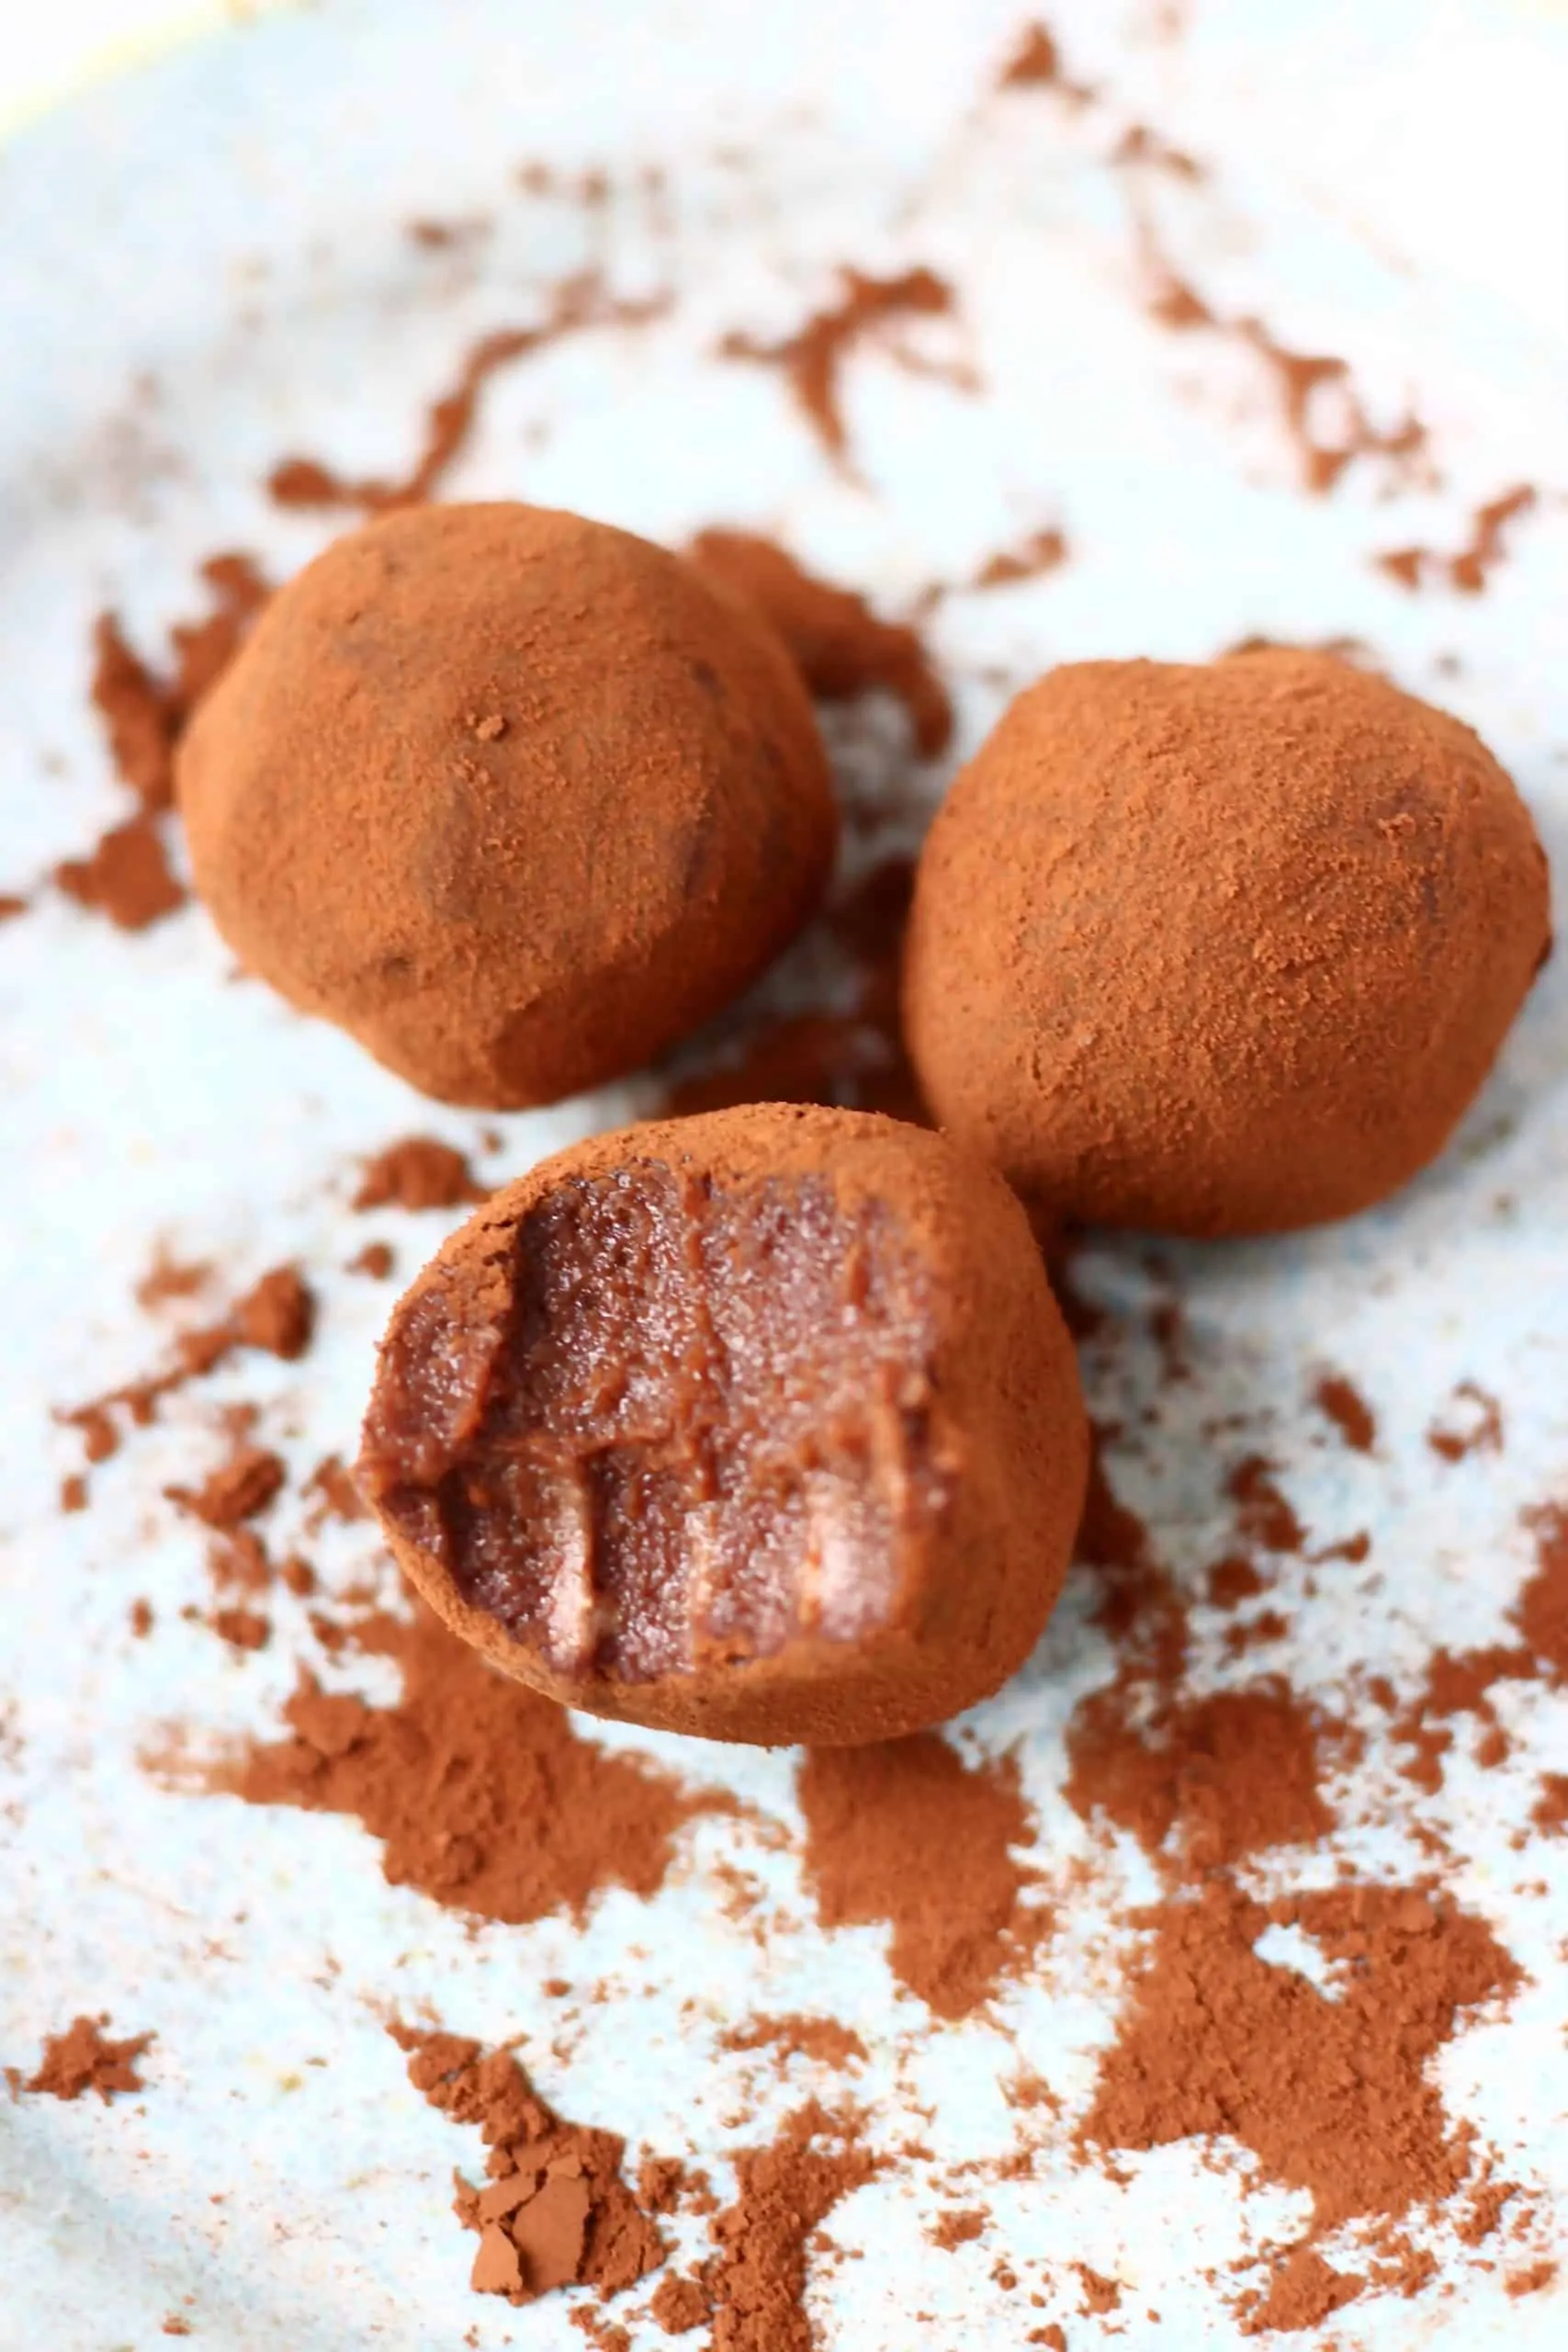 Three chocolate truffles dusted with cocoa powder with a bite taken out of one